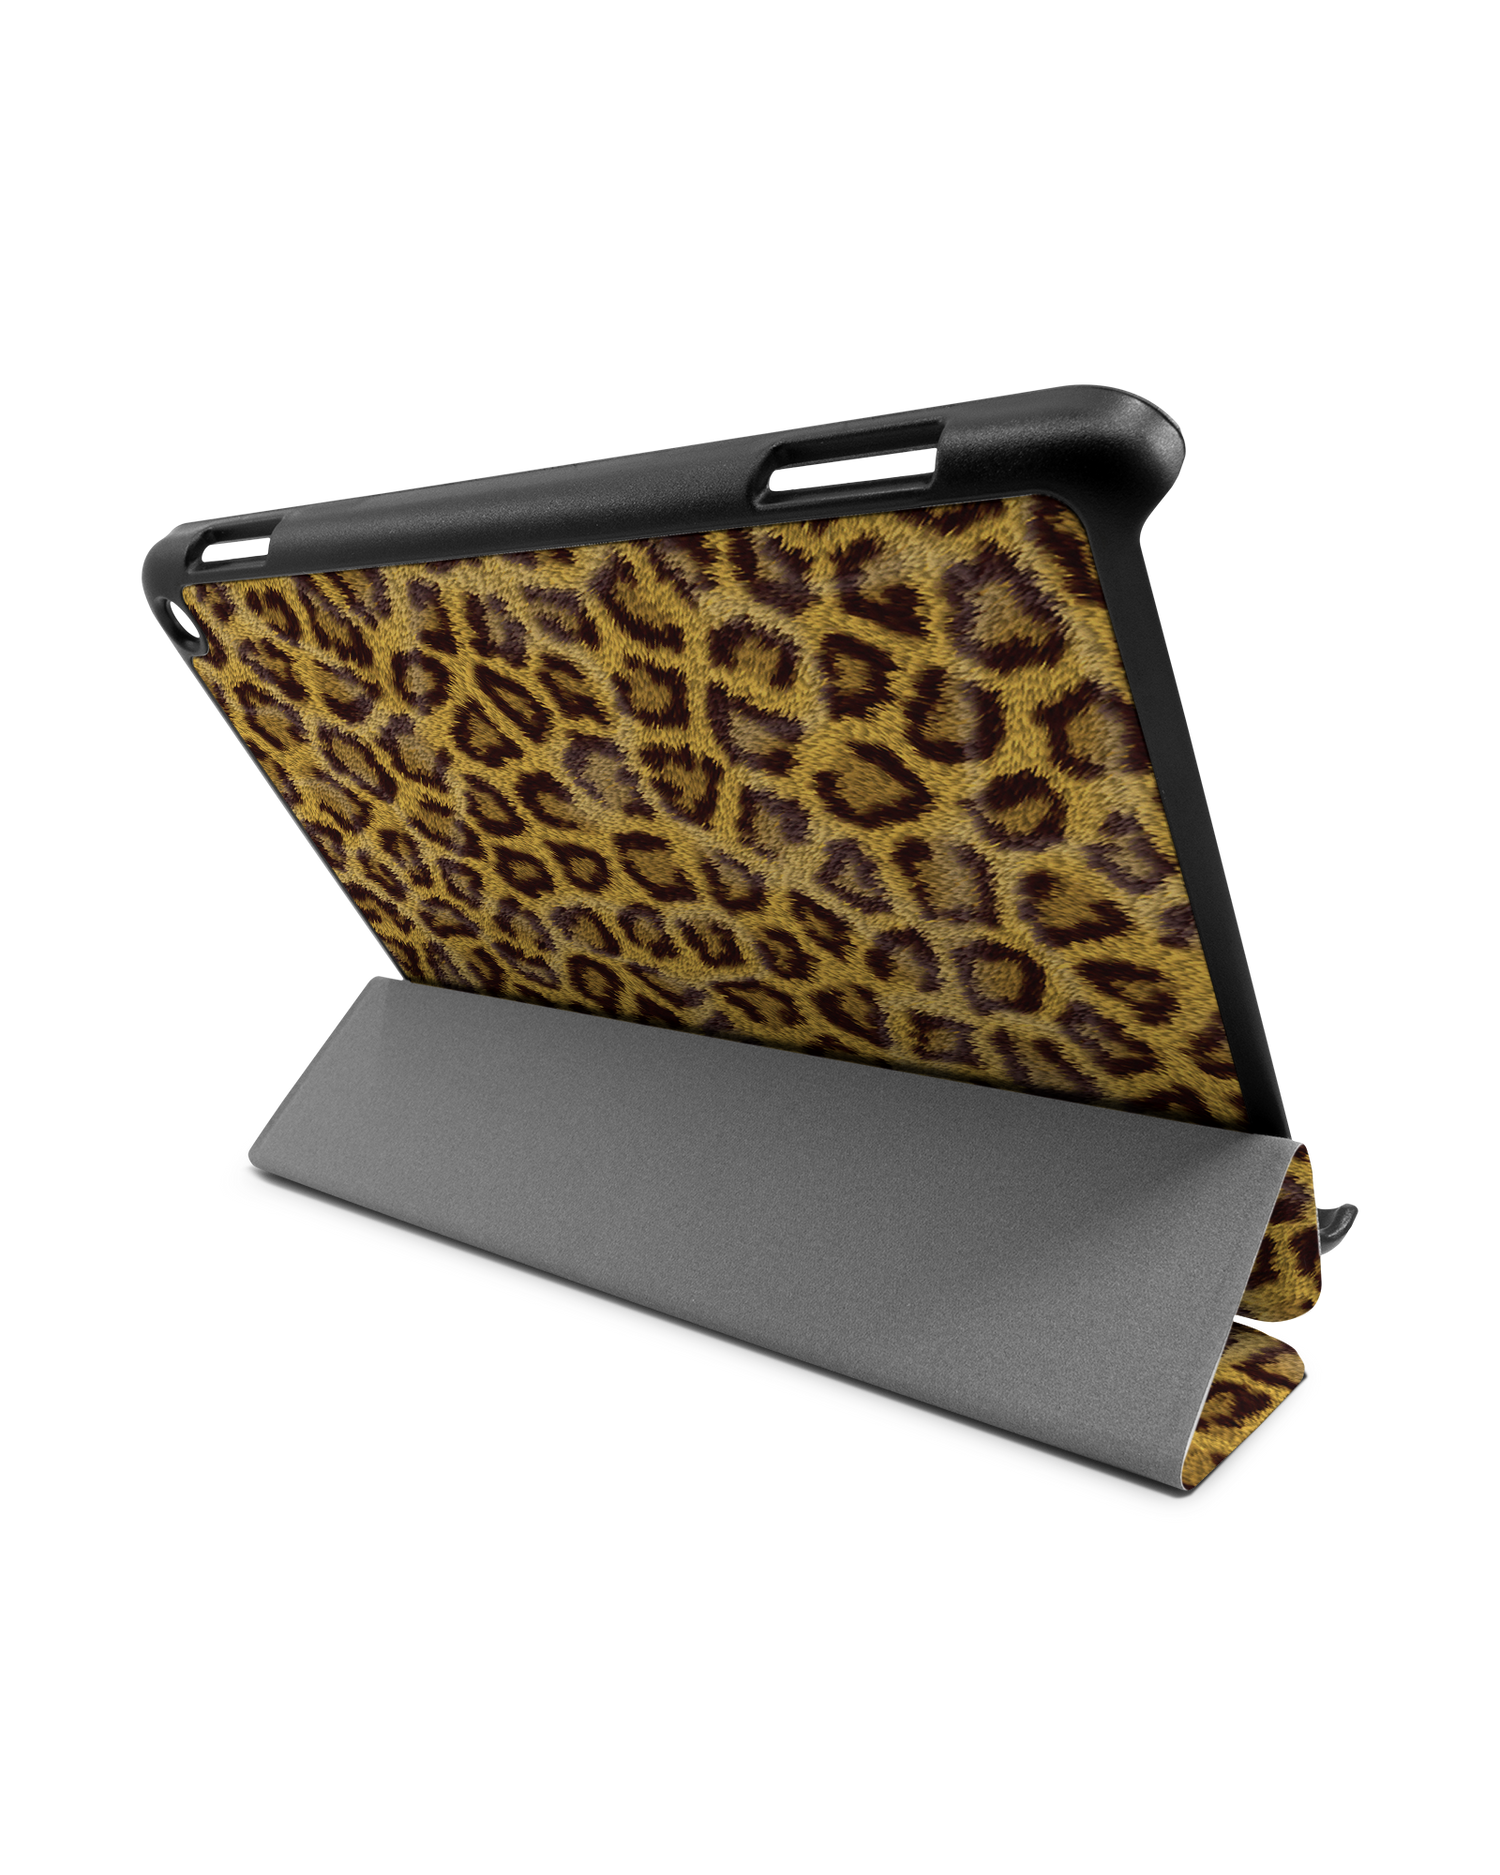 Leopard Skin Tablet Smart Case for Amazon Fire HD 8 (2022), Amazon Fire HD 8 Plus (2022), Amazon Fire HD 8 (2020), Amazon Fire HD 8 Plus (2020): Used as Stand